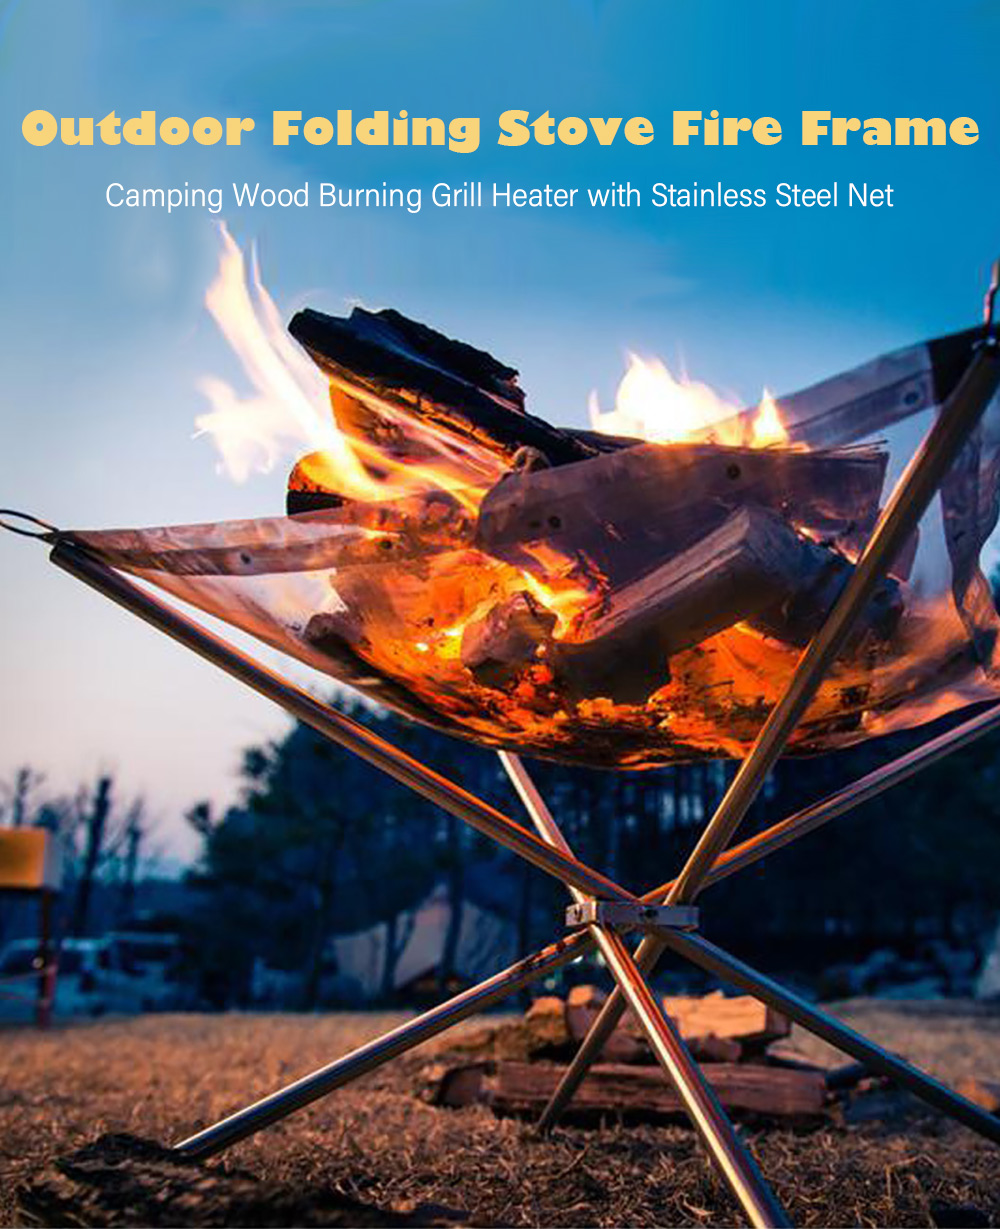 Selpa Portable Folding Stove Fire Frame Camping Wood Burning Grill Heater Stainless Steel Net